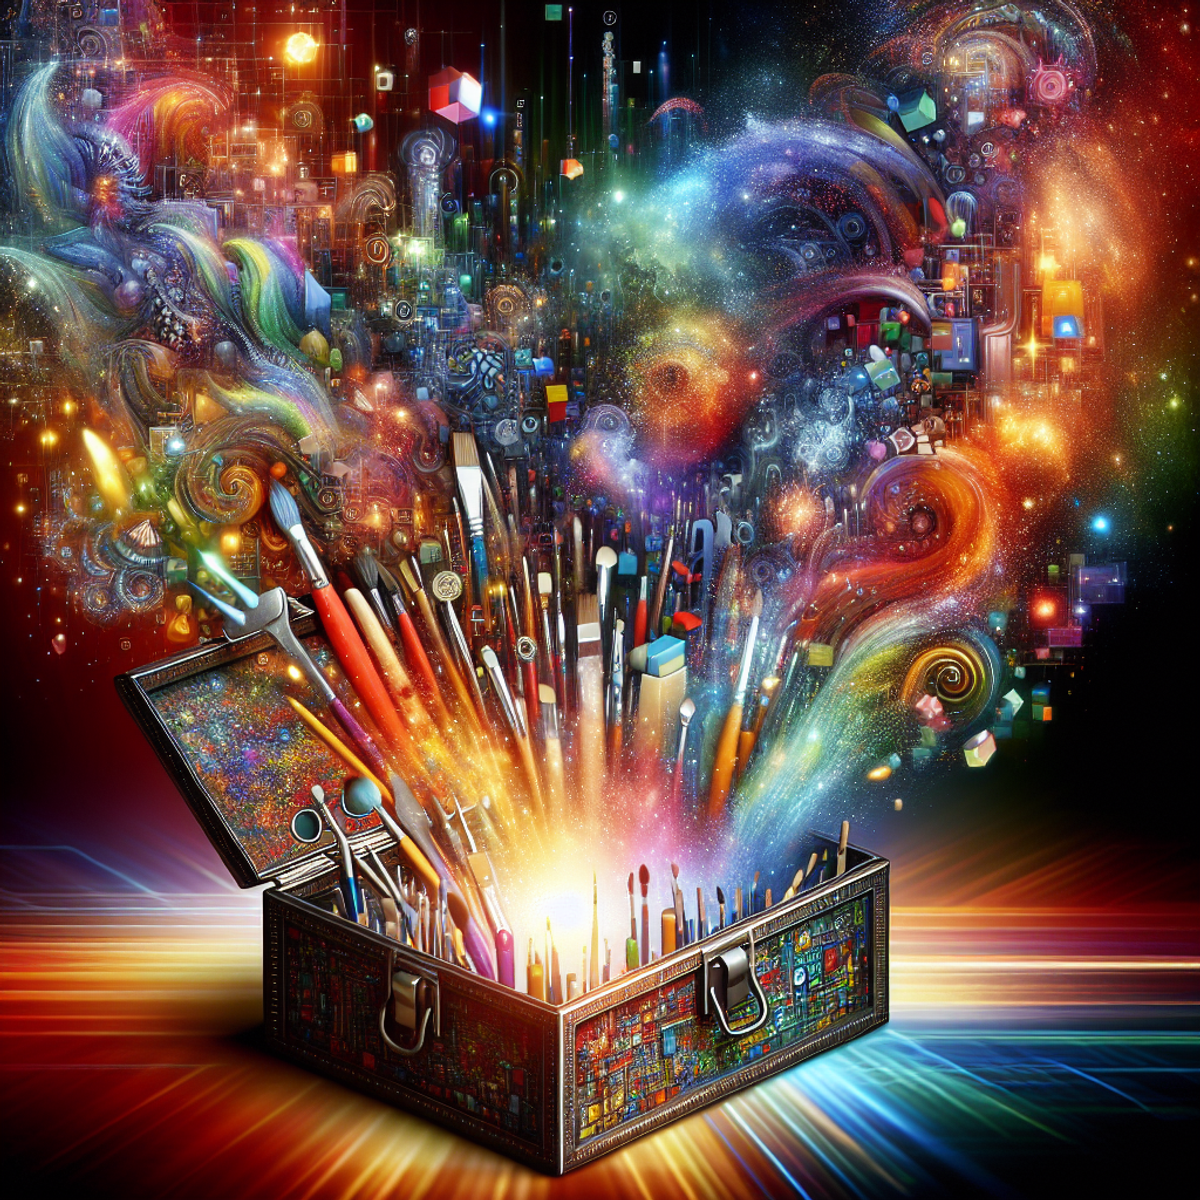 A digital artwork of a virtual toolbox morphing into a stunning masterpiece with vivid colors, complex shapes, and shimmering lights.